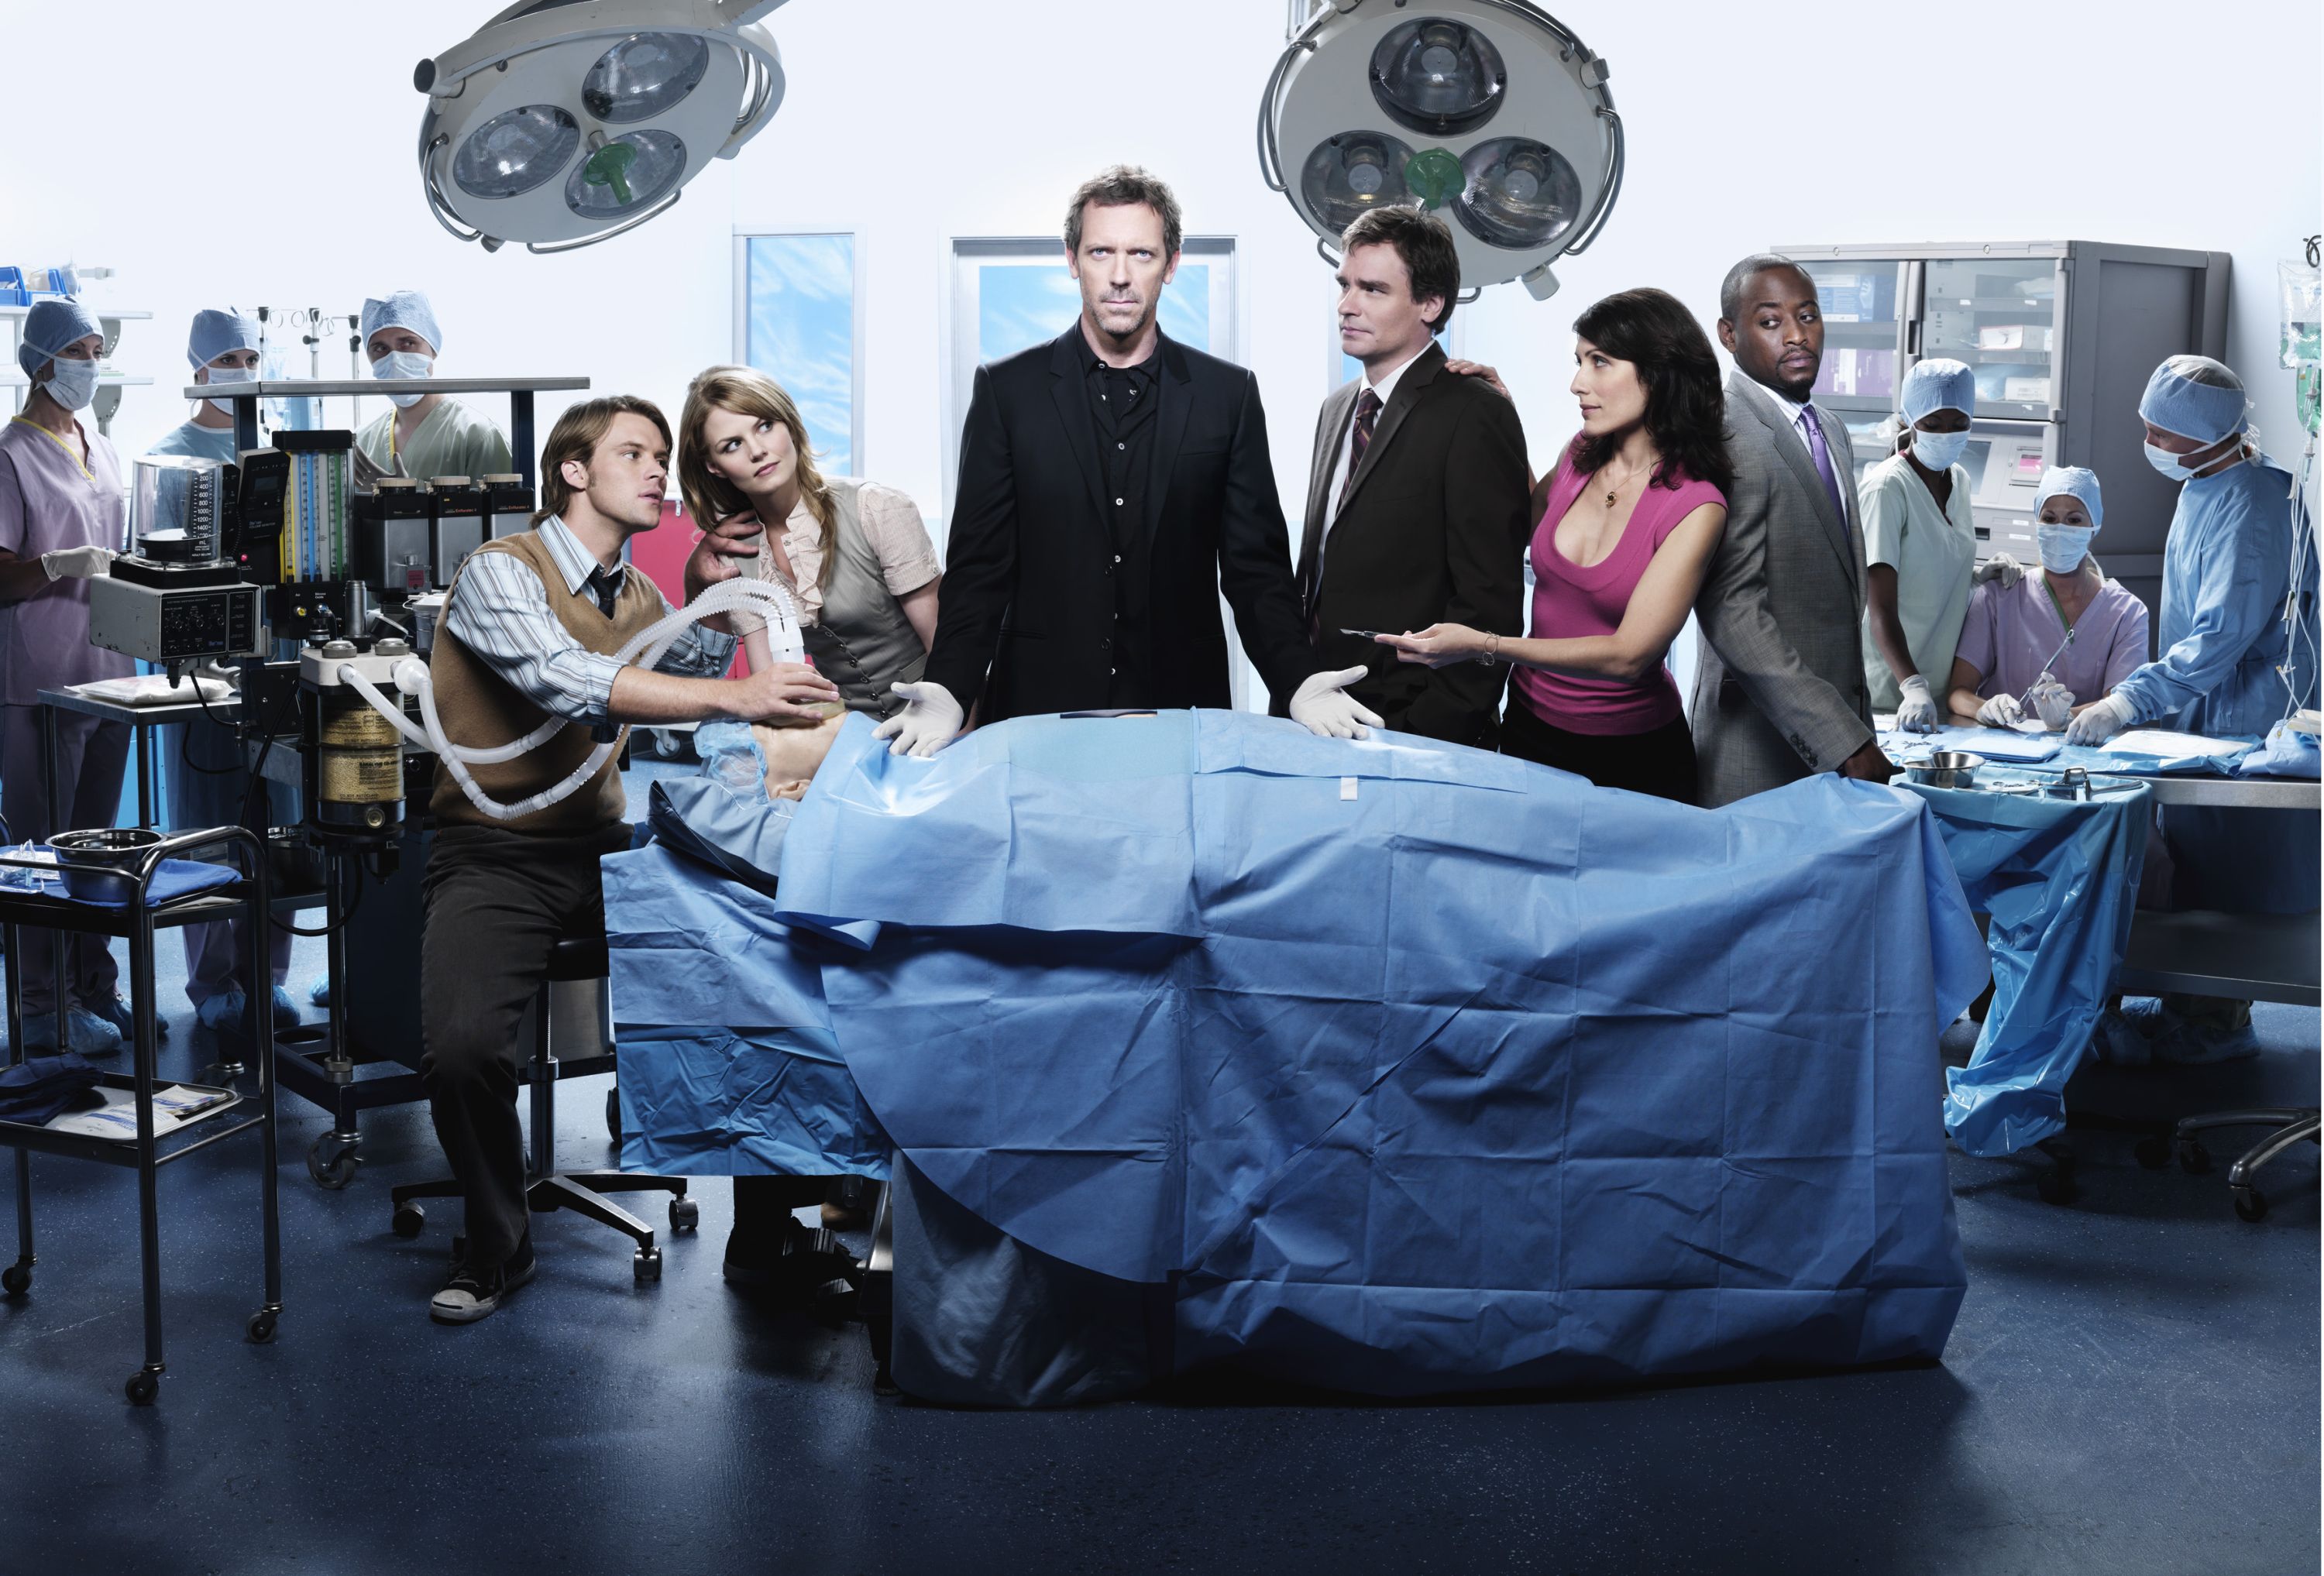 Gregory House, Lisa Cuddy, Eric Foreman, James Wilson, and others gather together.